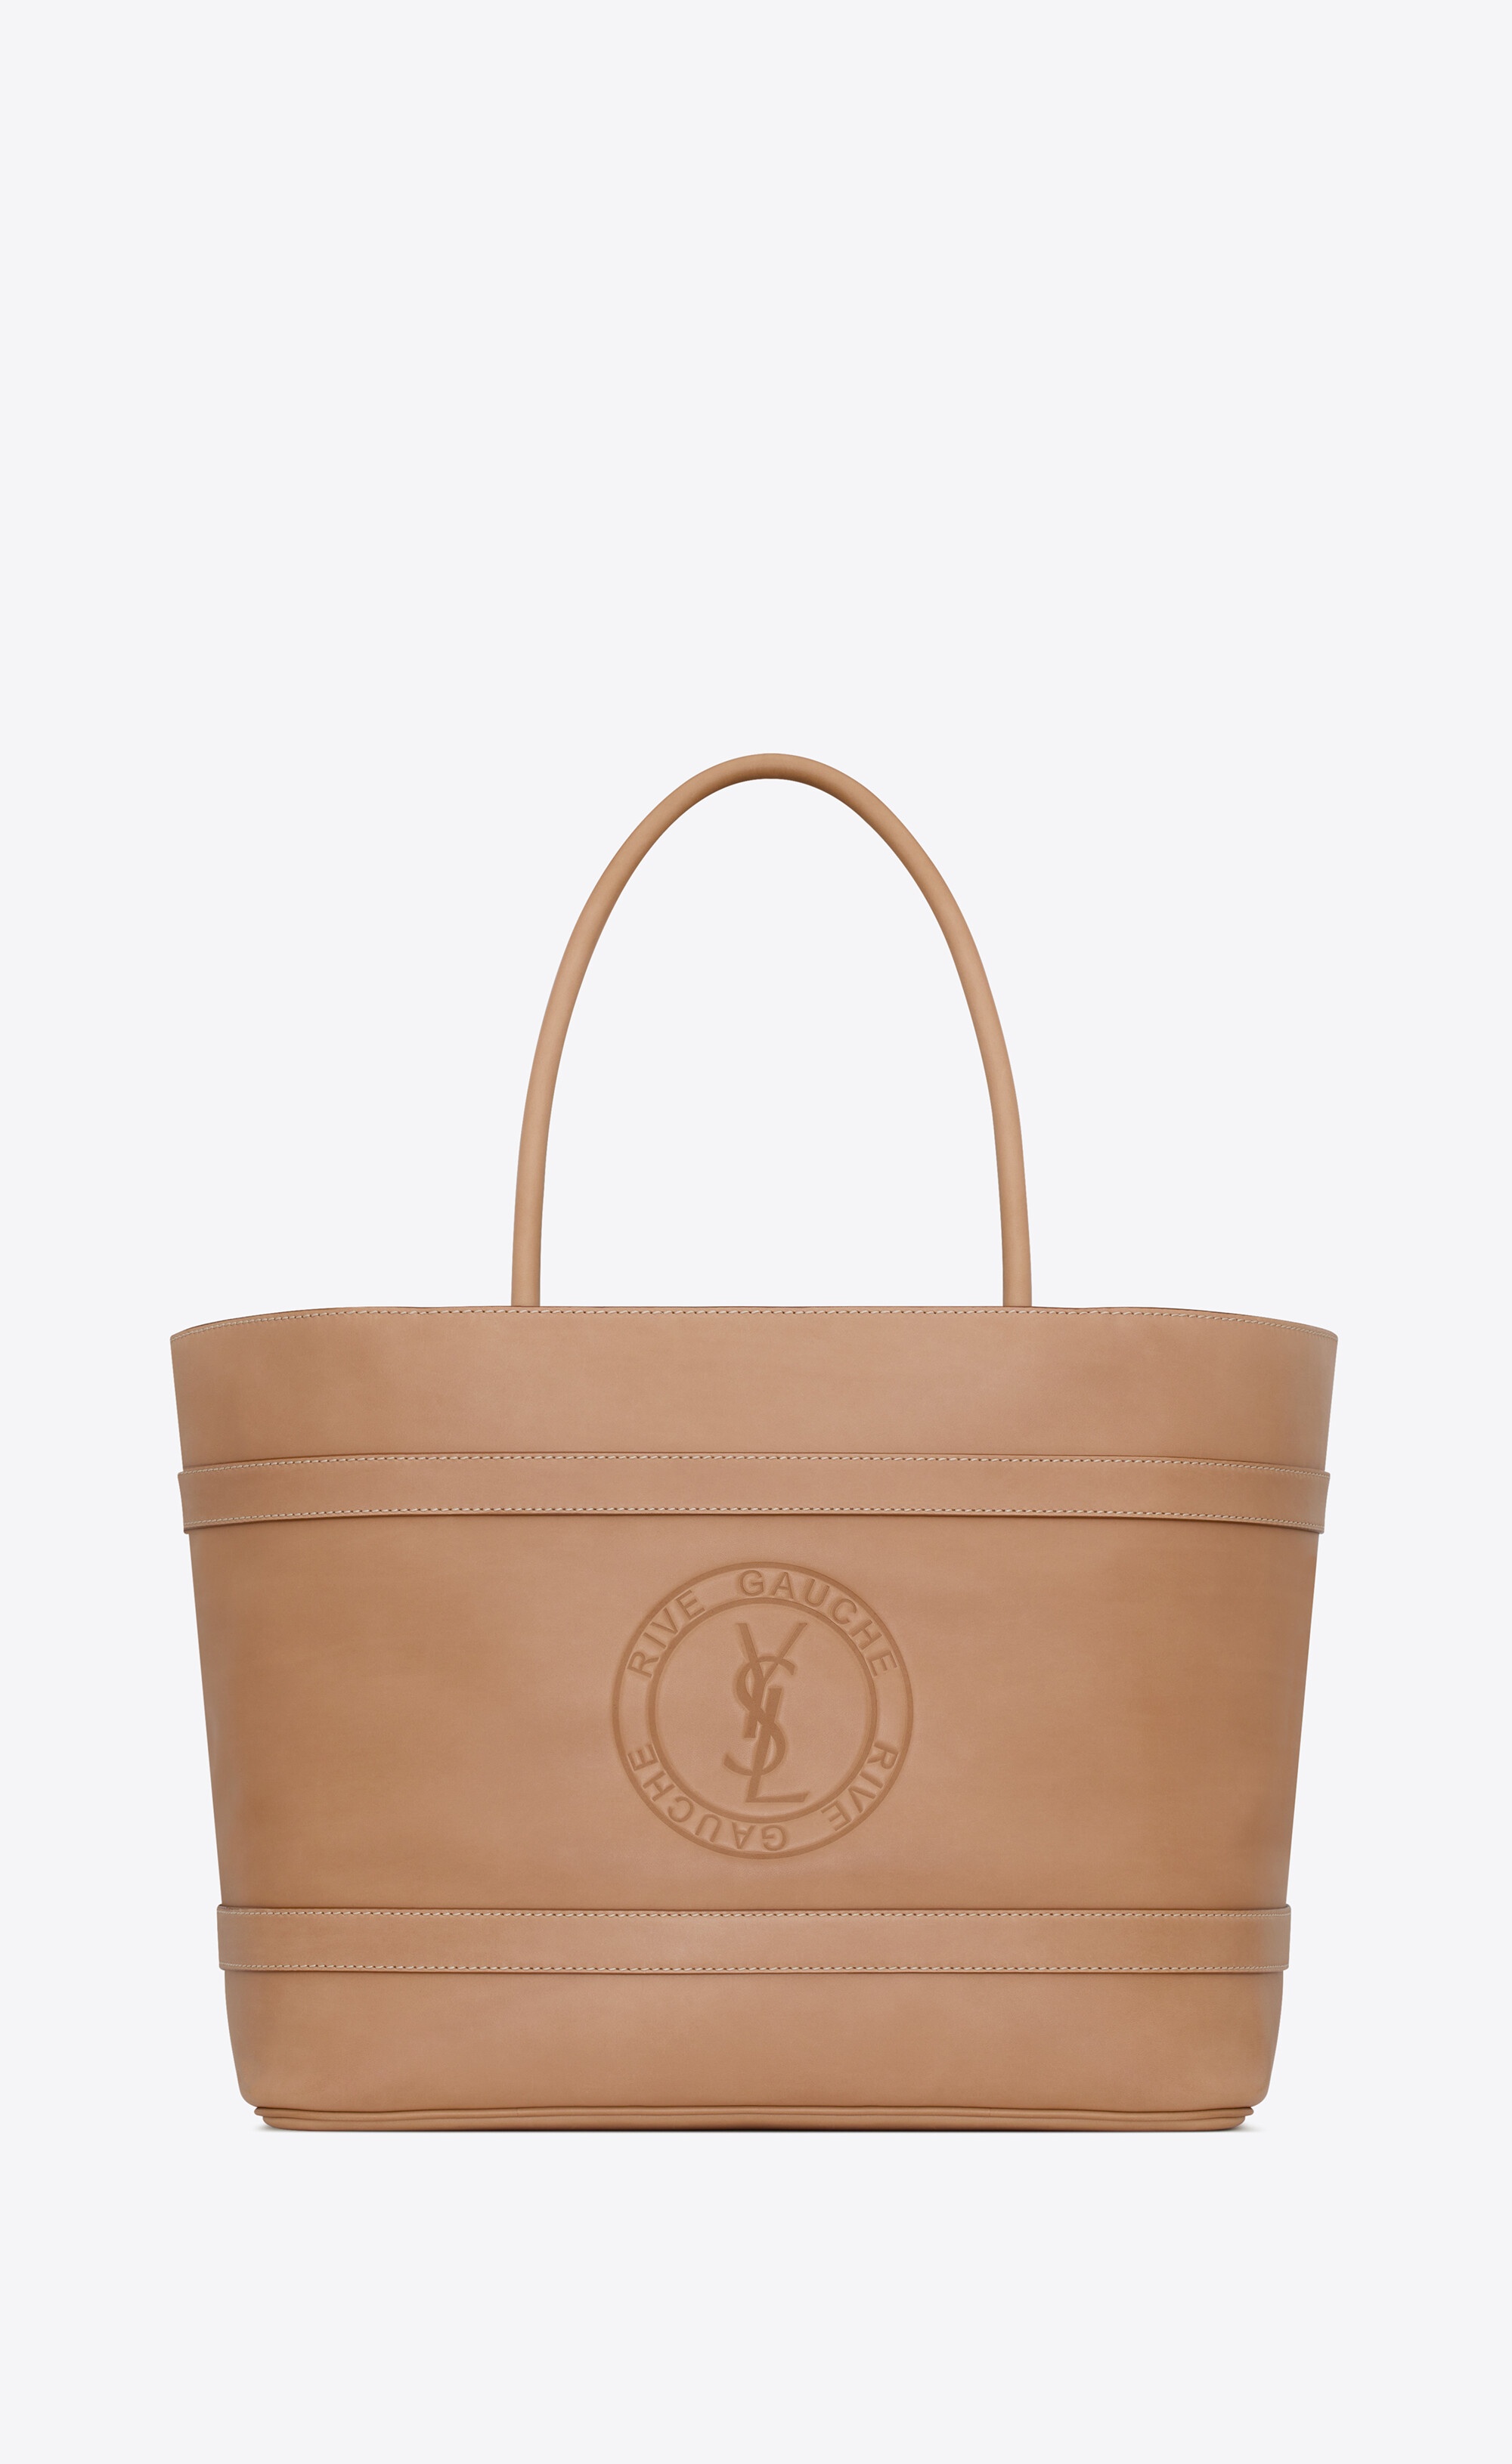 rive gauche tote bag in vegetable-tanned leather - 1